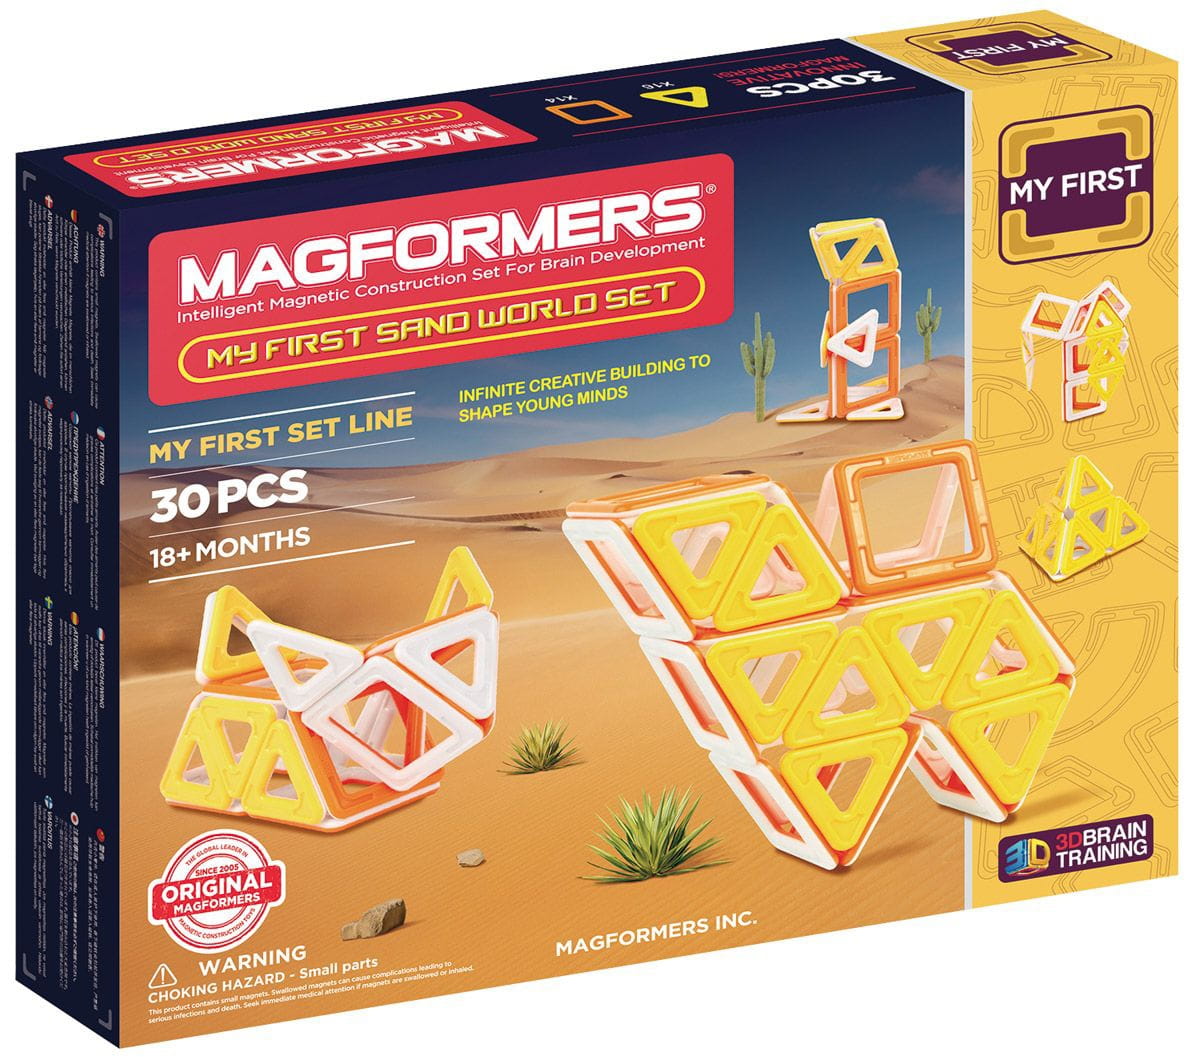    Magformers My First Sand World (30 )